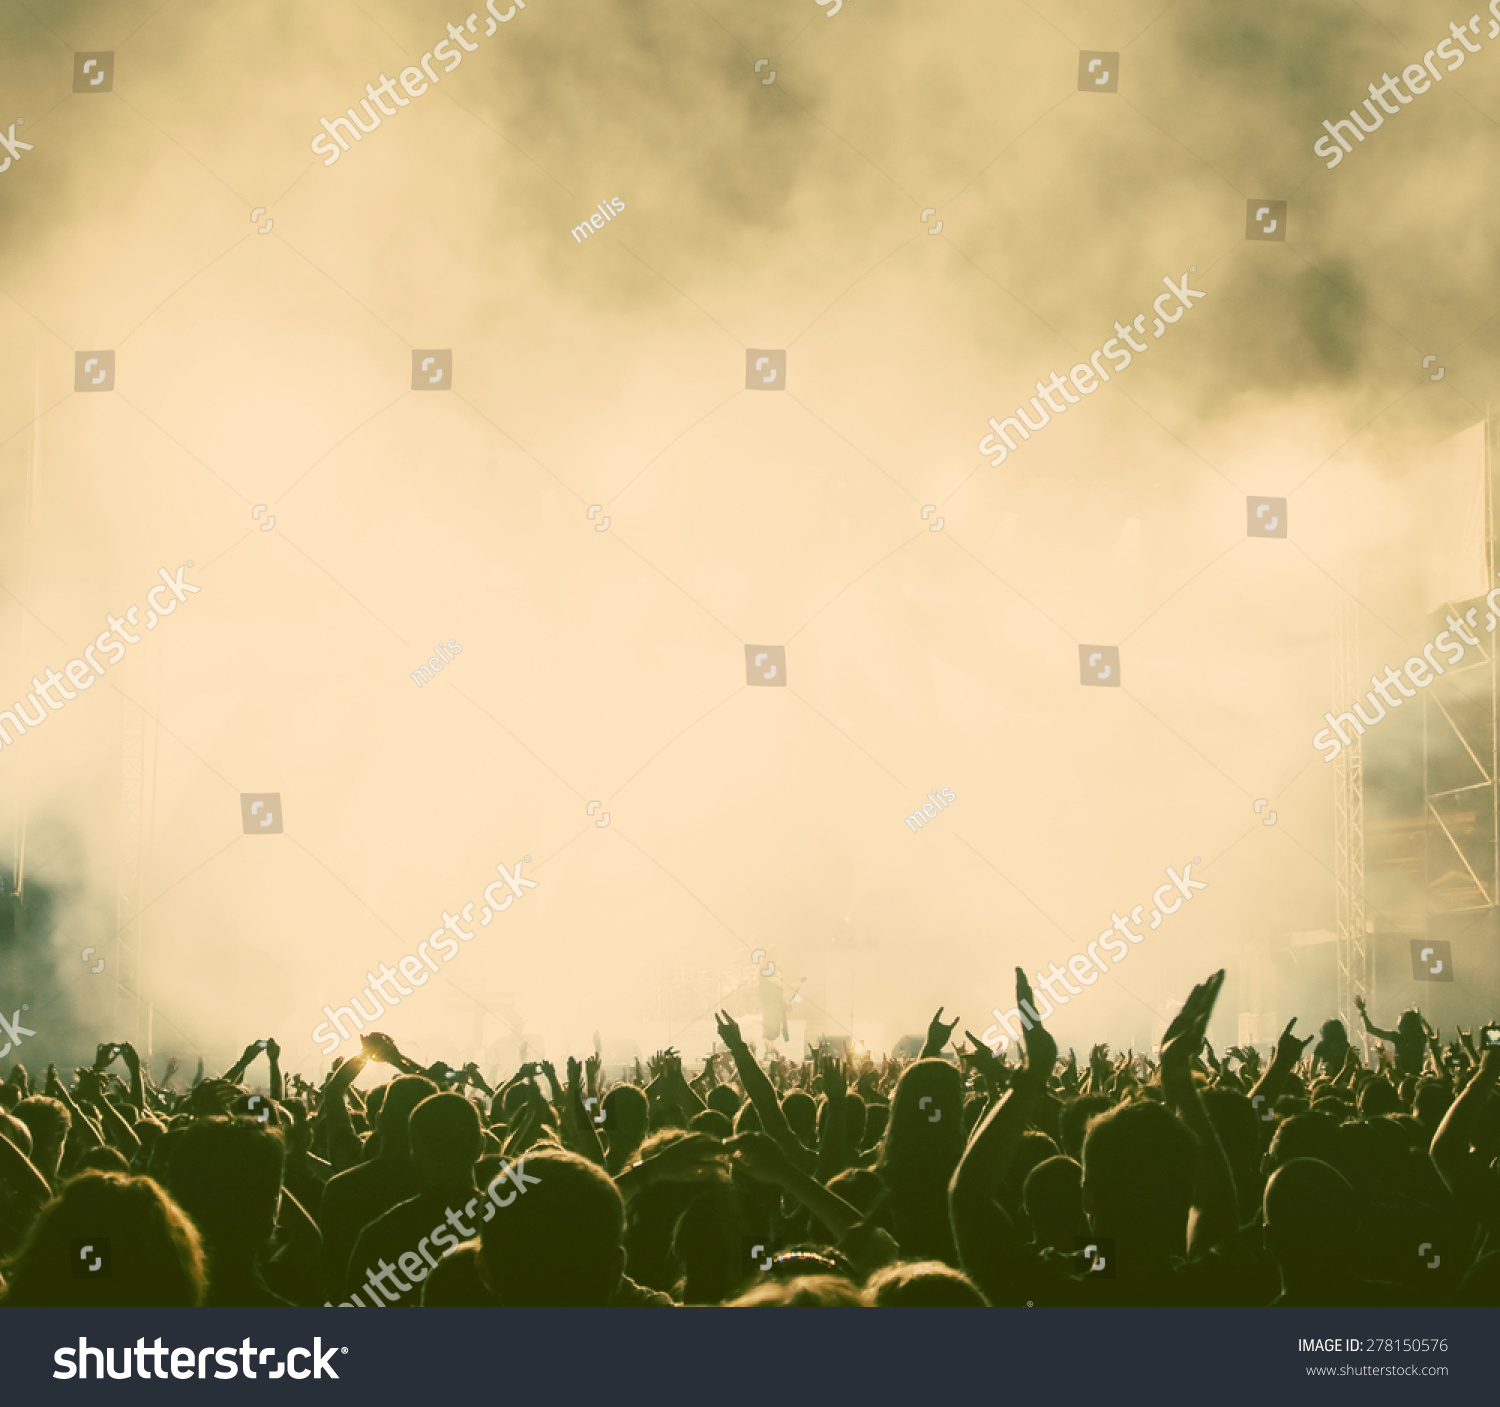 Crowd at concert - retro style photograph #278150576